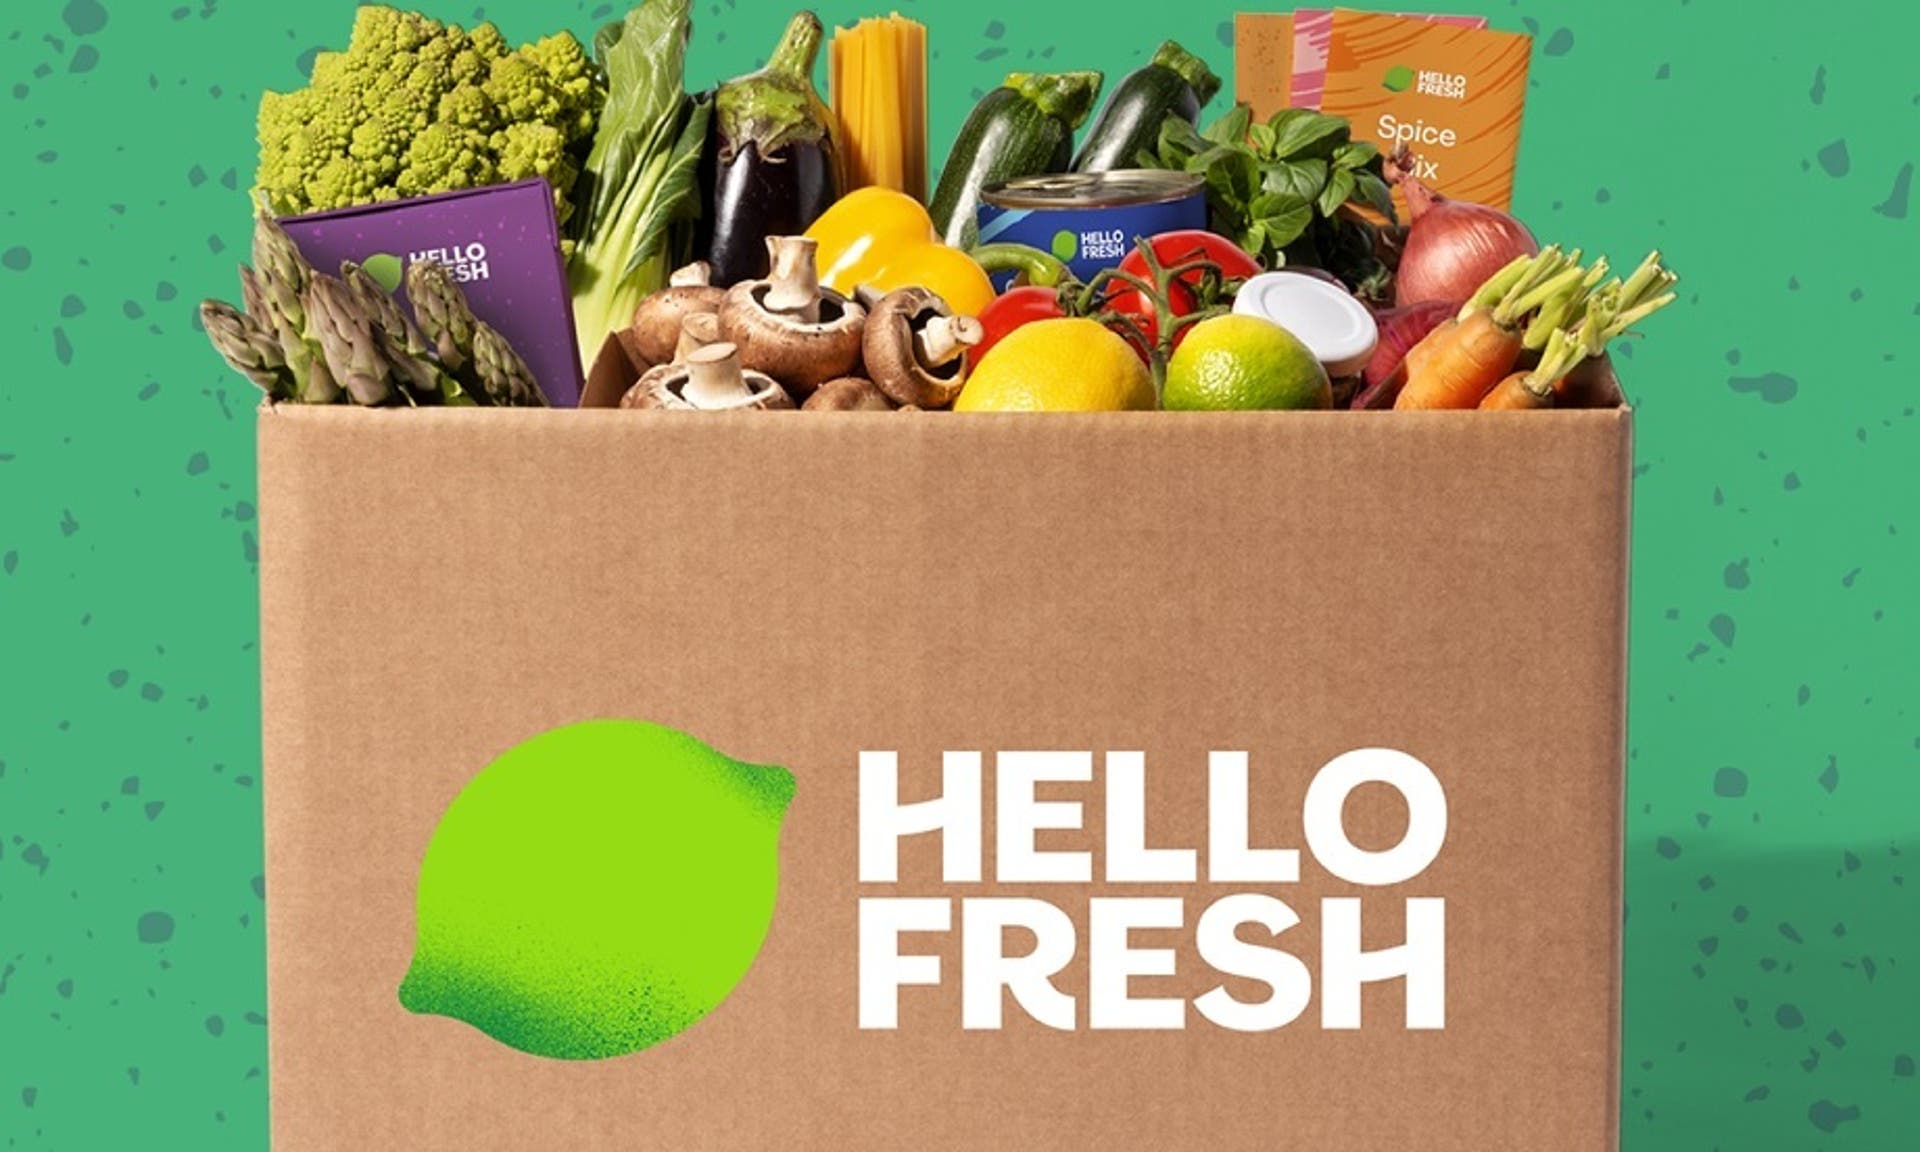  A photo of a Hello Fresh cardboard box containing a selection of fresh fruit and vegetables against a green background. 